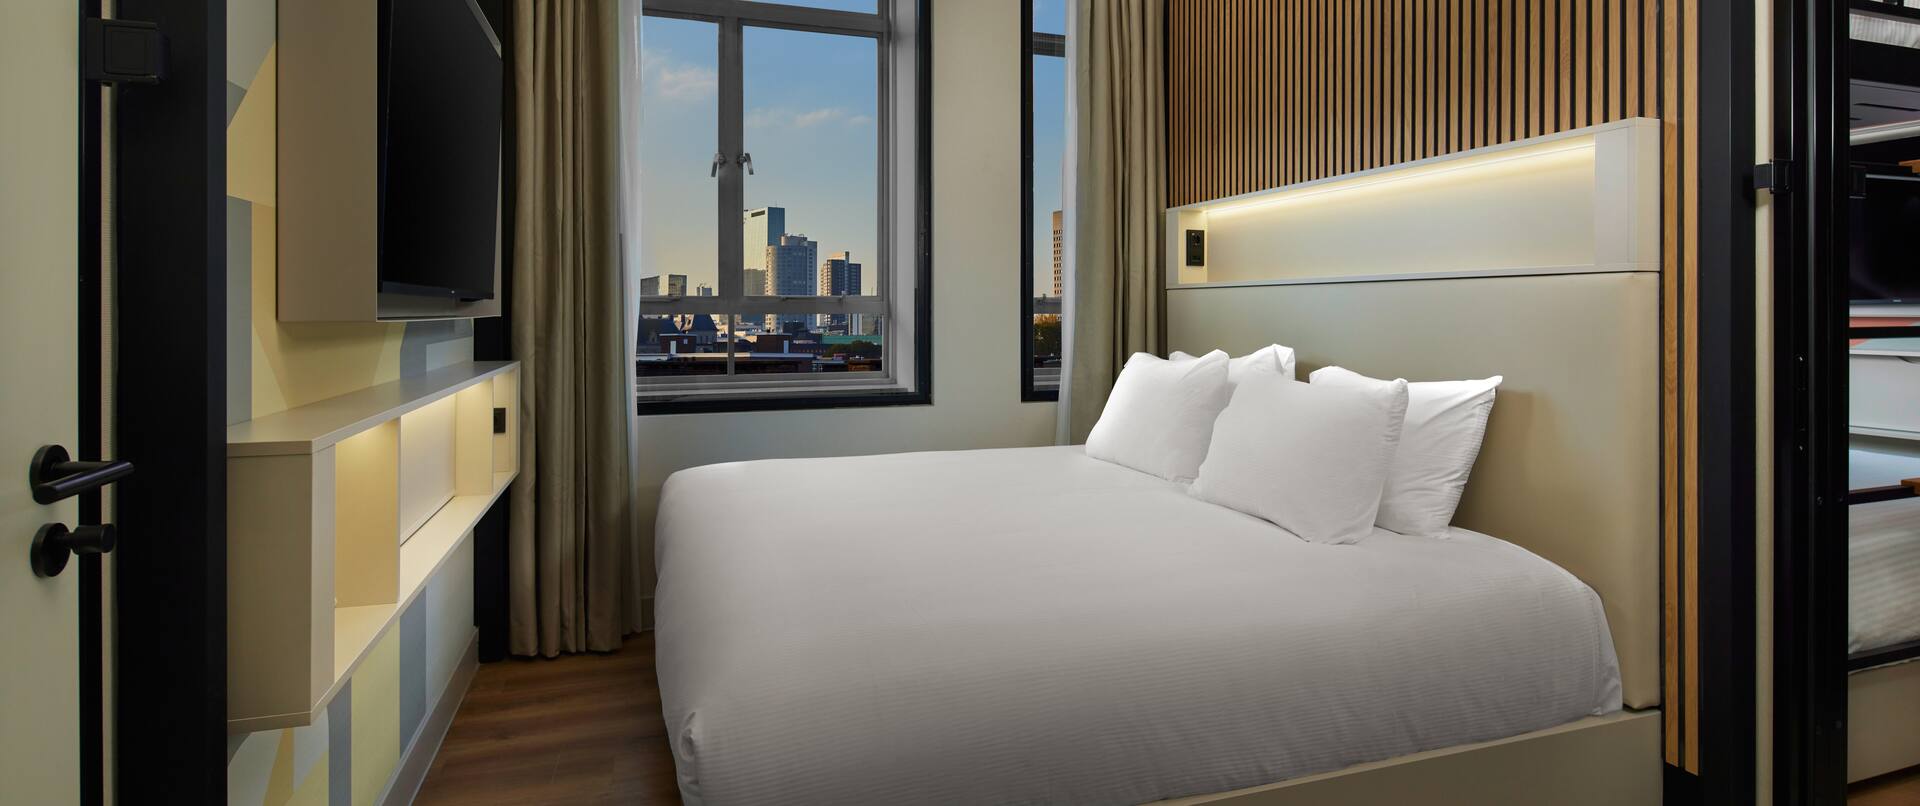 a large bed in a room with HDTV and city view